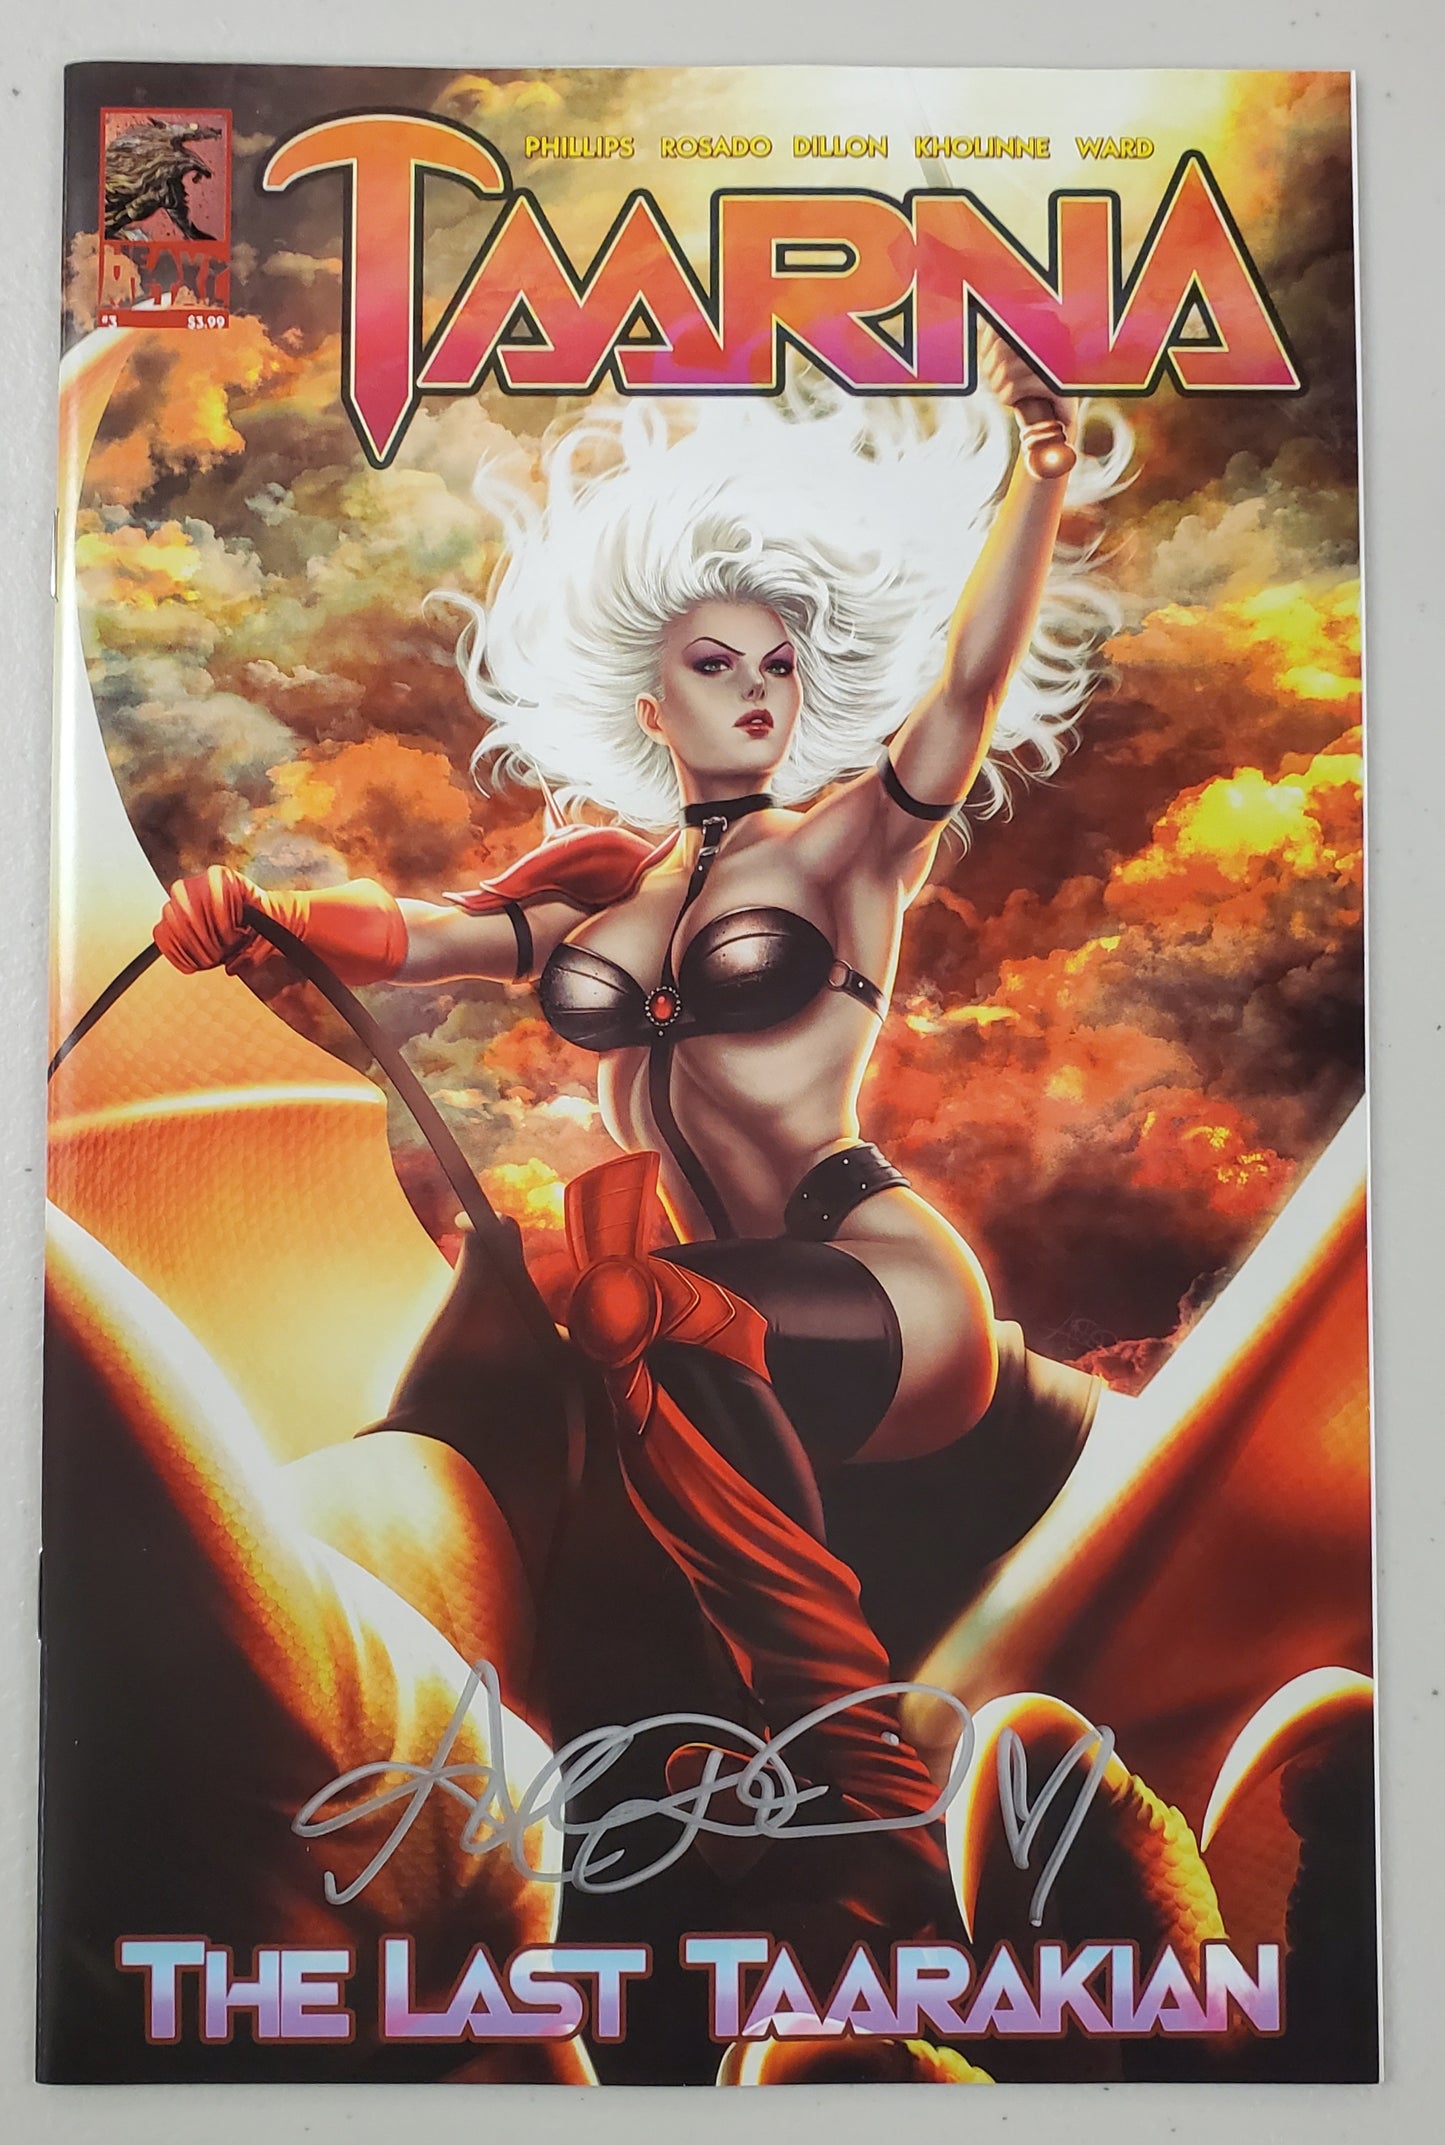 TAARNA #3 TRADE DRESS VARIANT SIGNED BY ARIEL DIAZ